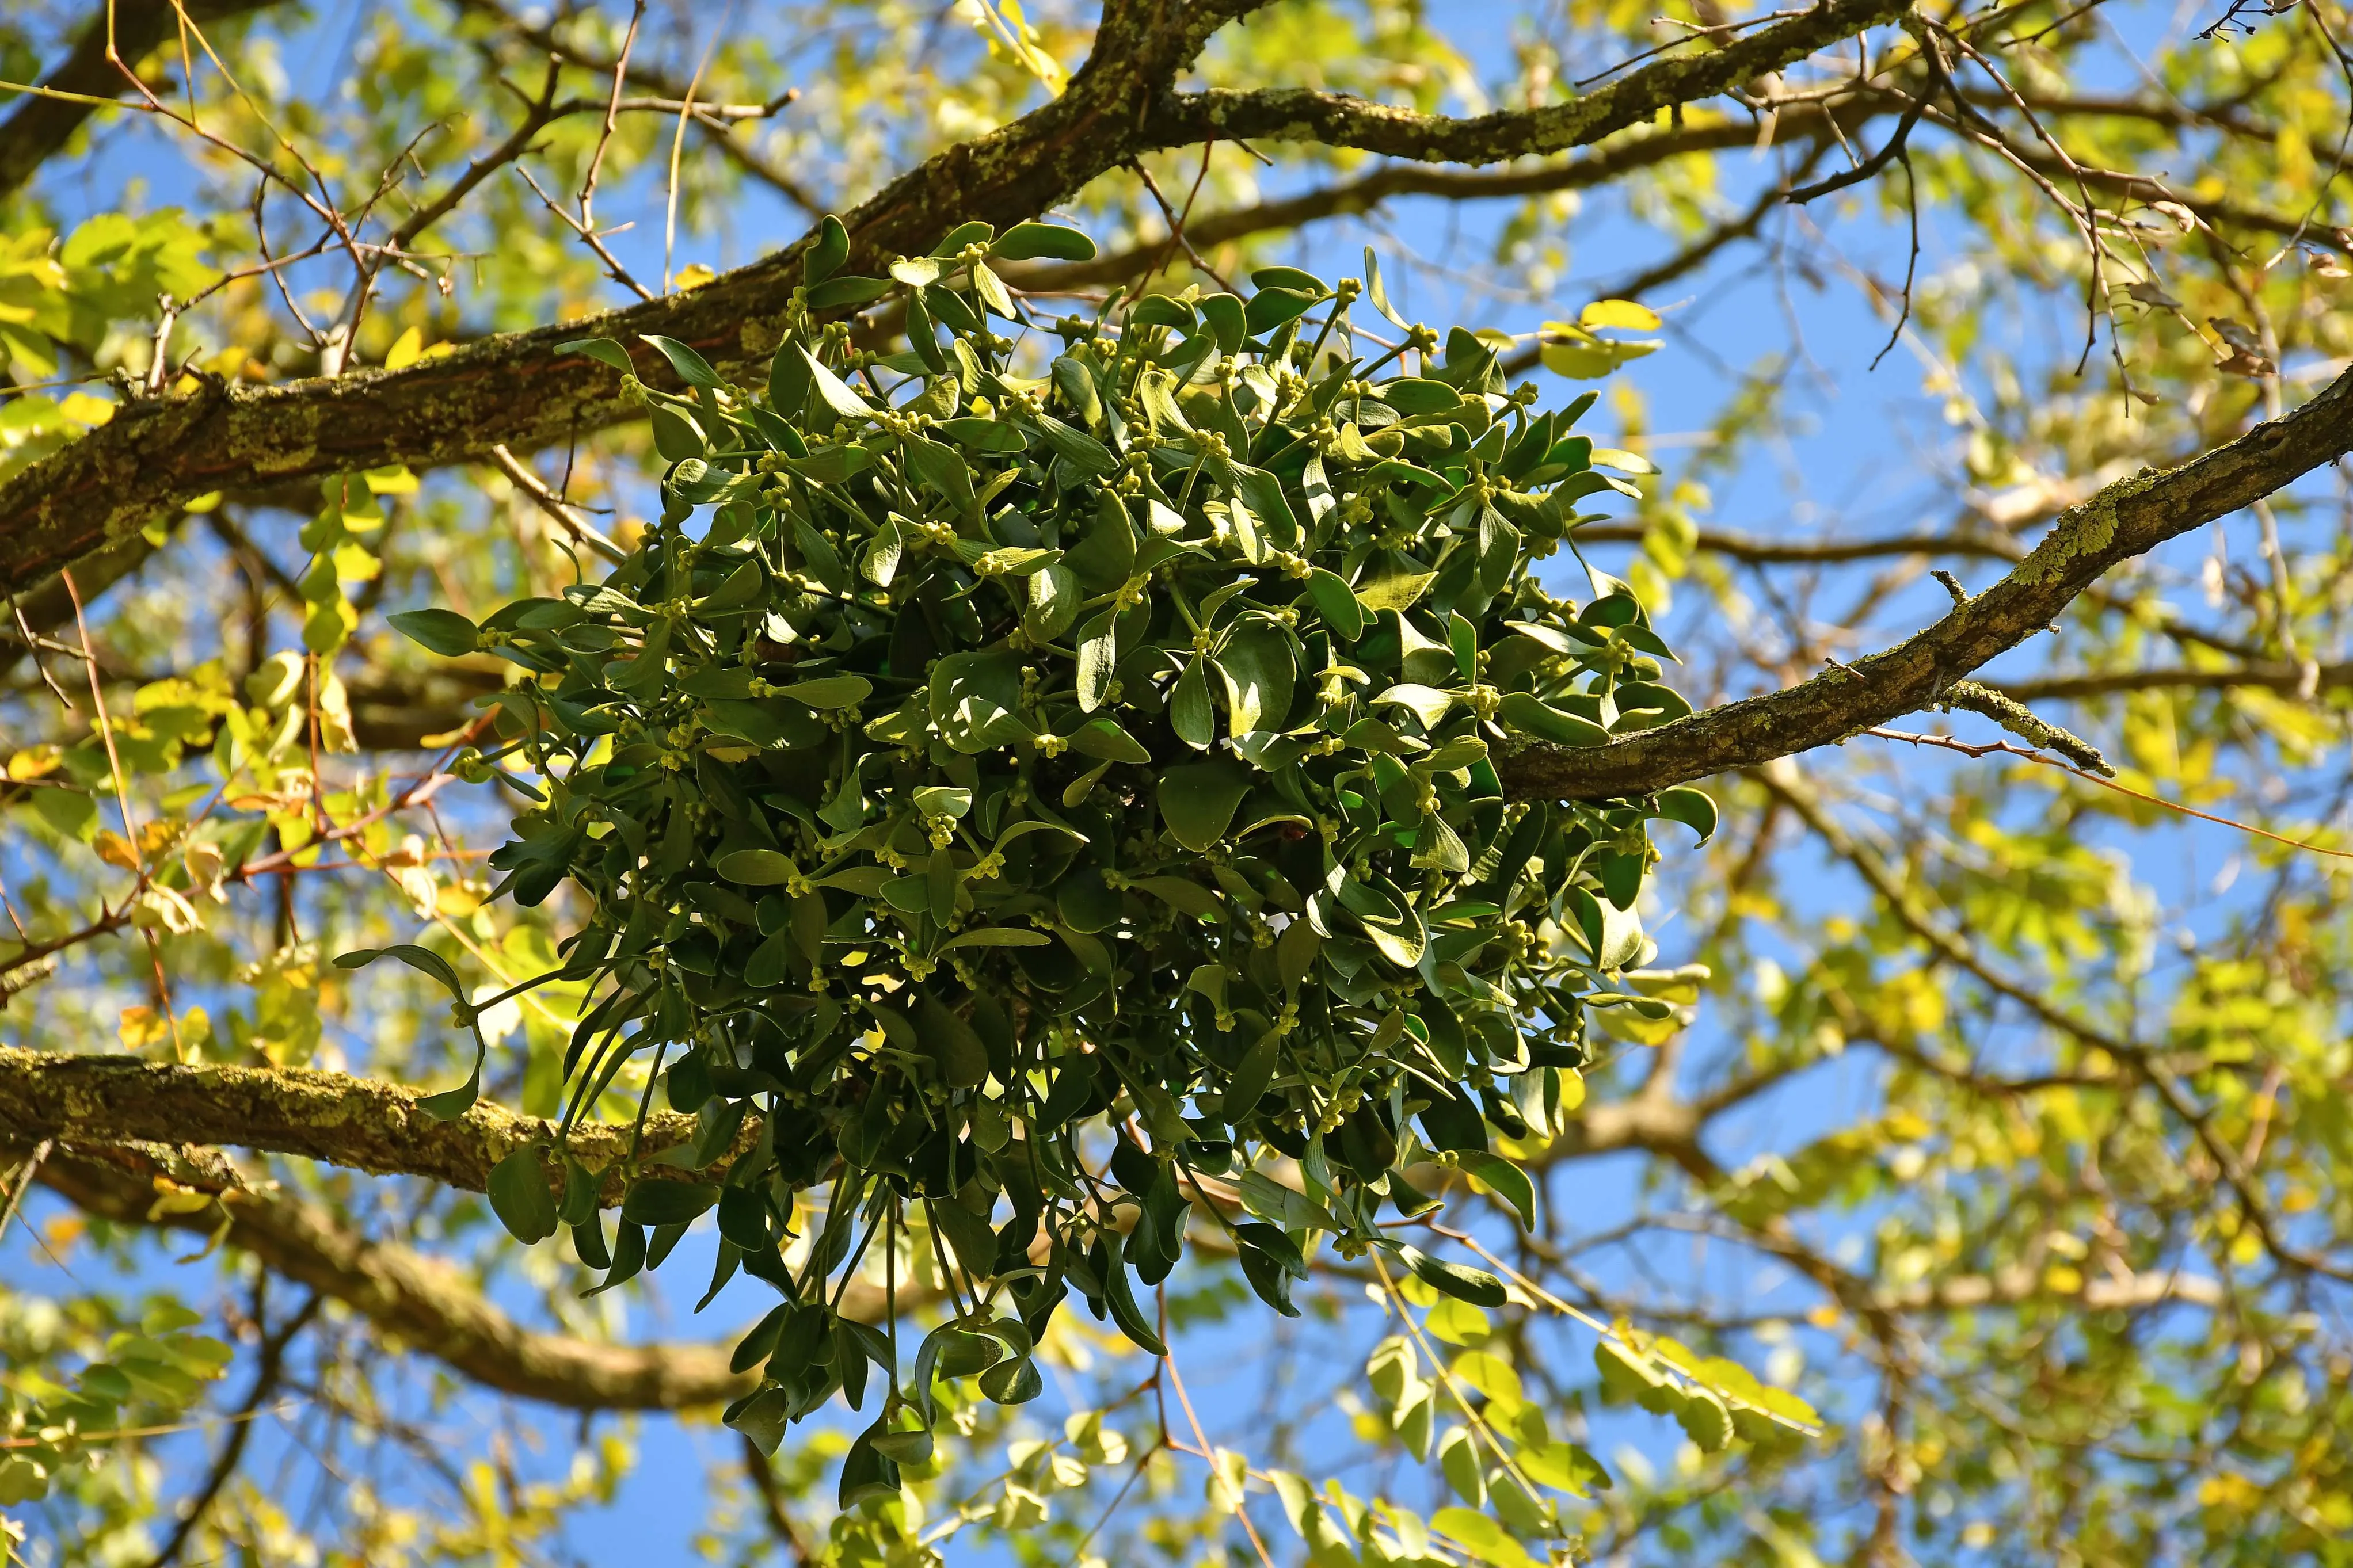 A neat ball of Mistletoe high up in a tree branch